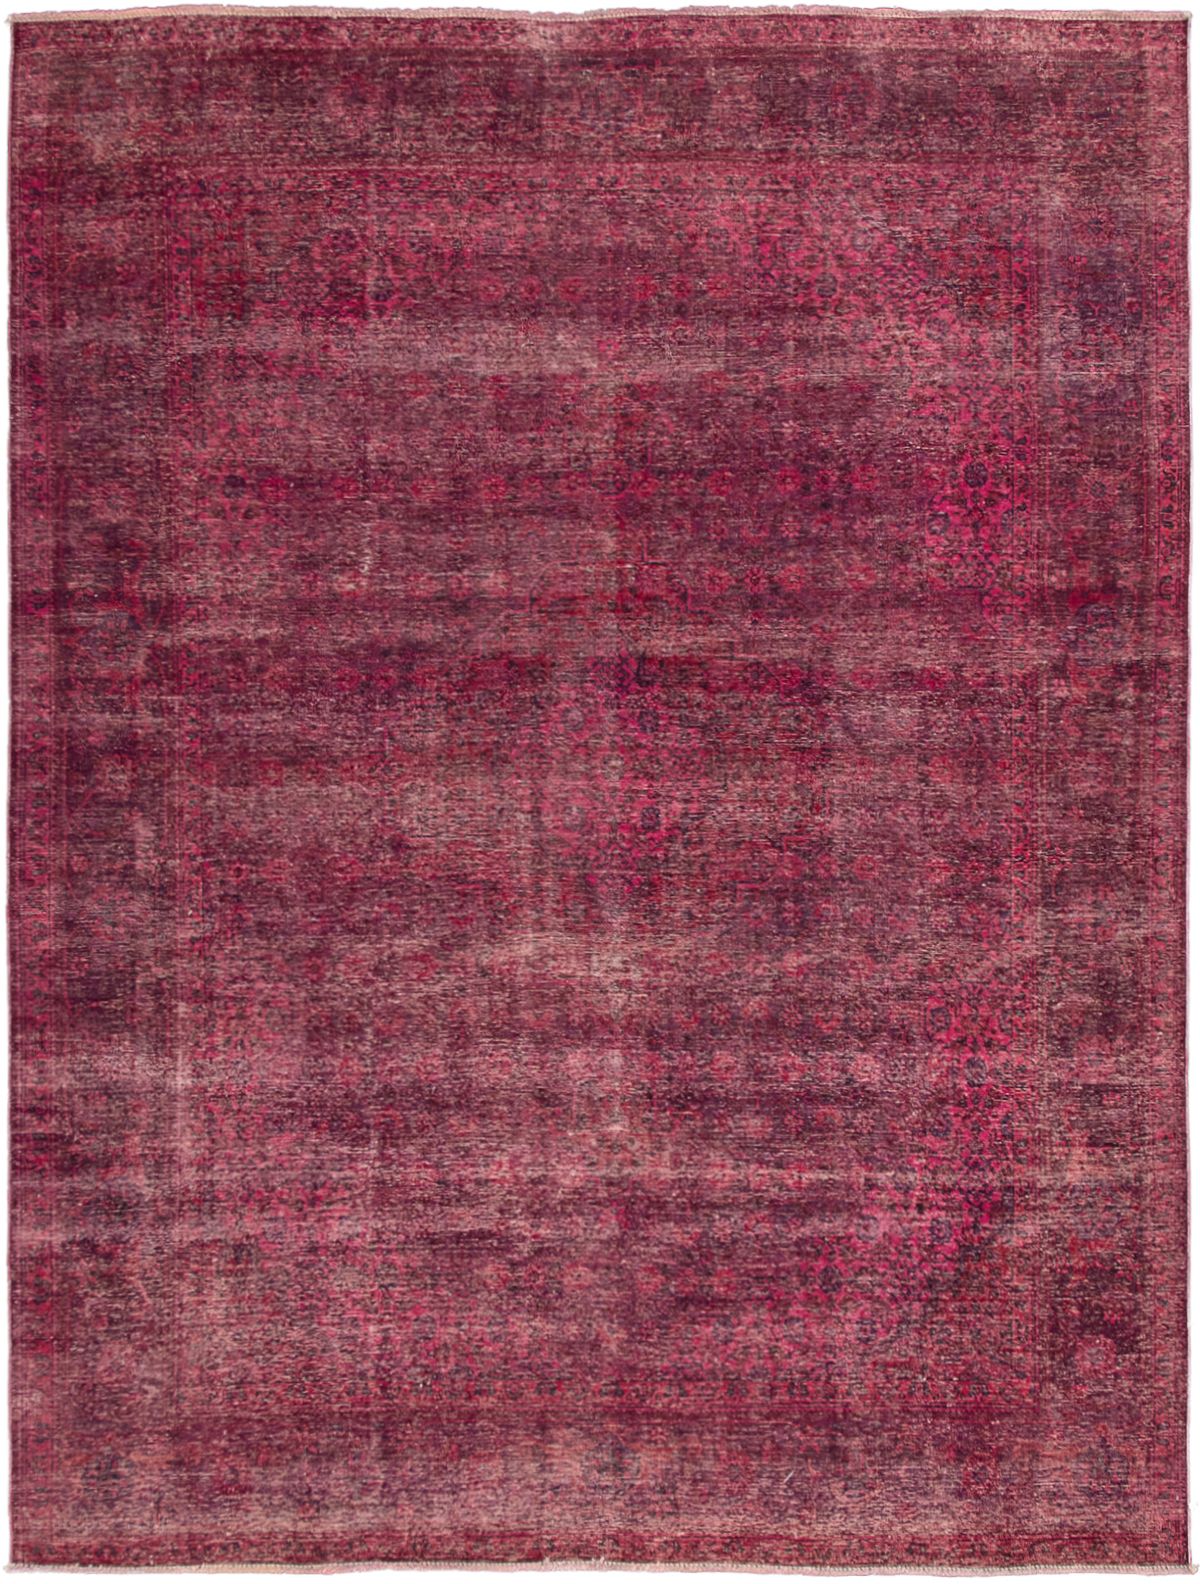 Hand-knotted Color Transition Burgundy Wool Rug 9'8" x 12'9" Size: 9'8" x 12'9"  